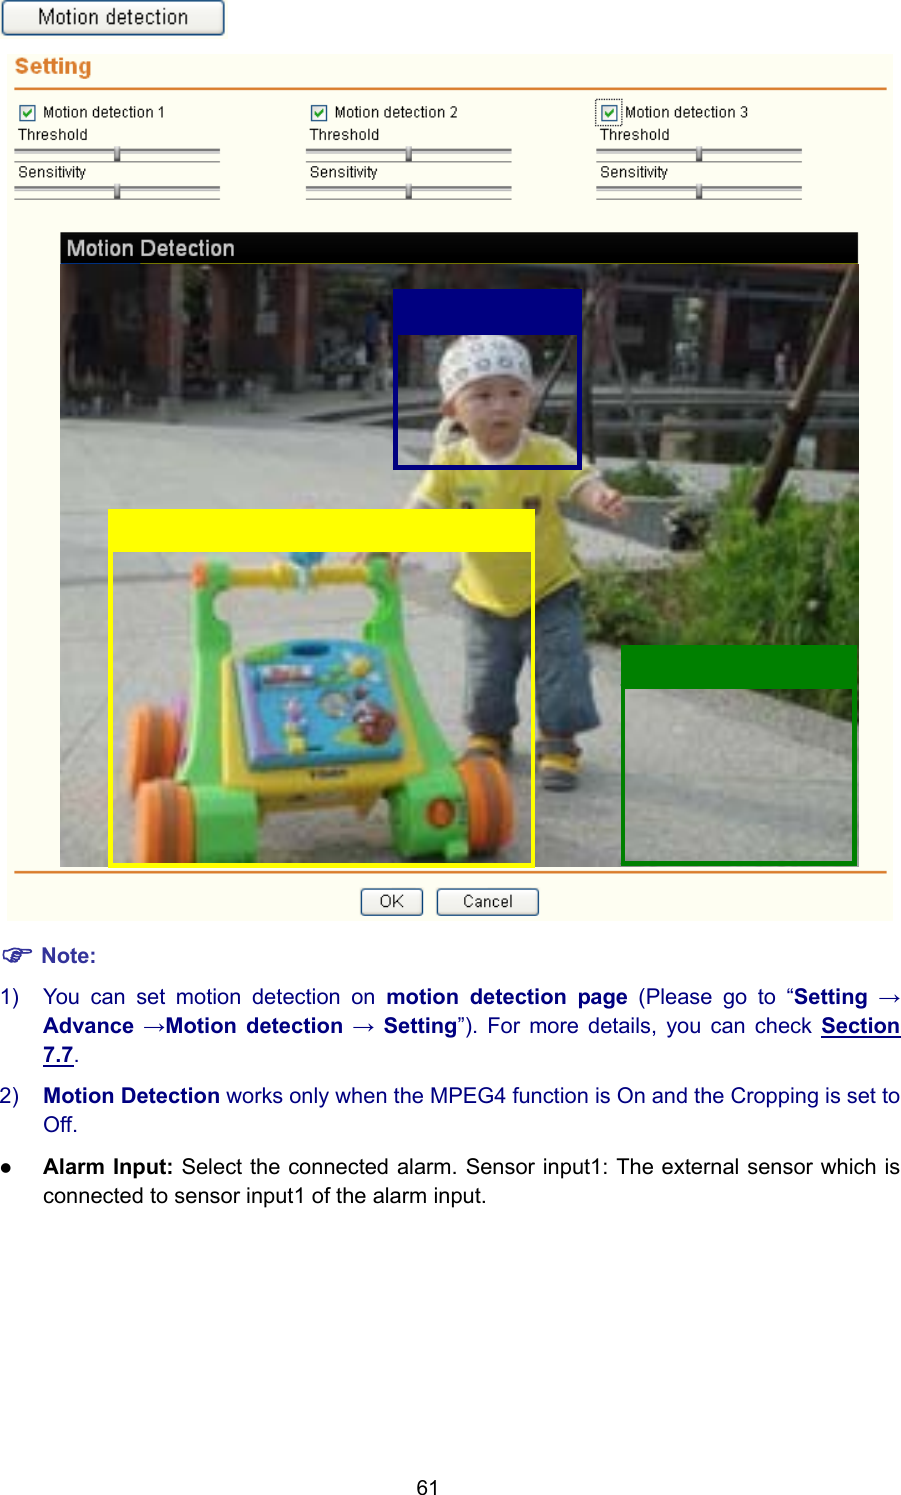 61   ) Note: 1)  You can set motion detection on motion detection page (Please go to “Setting → Advance →Motion detection → Setting”). For more details, you can check Section 7.7. 2)  Motion Detection works only when the MPEG4 function is On and the Cropping is set to Off. z Alarm Input: Select the connected alarm. Sensor input1: The external sensor which is connected to sensor input1 of the alarm input. 